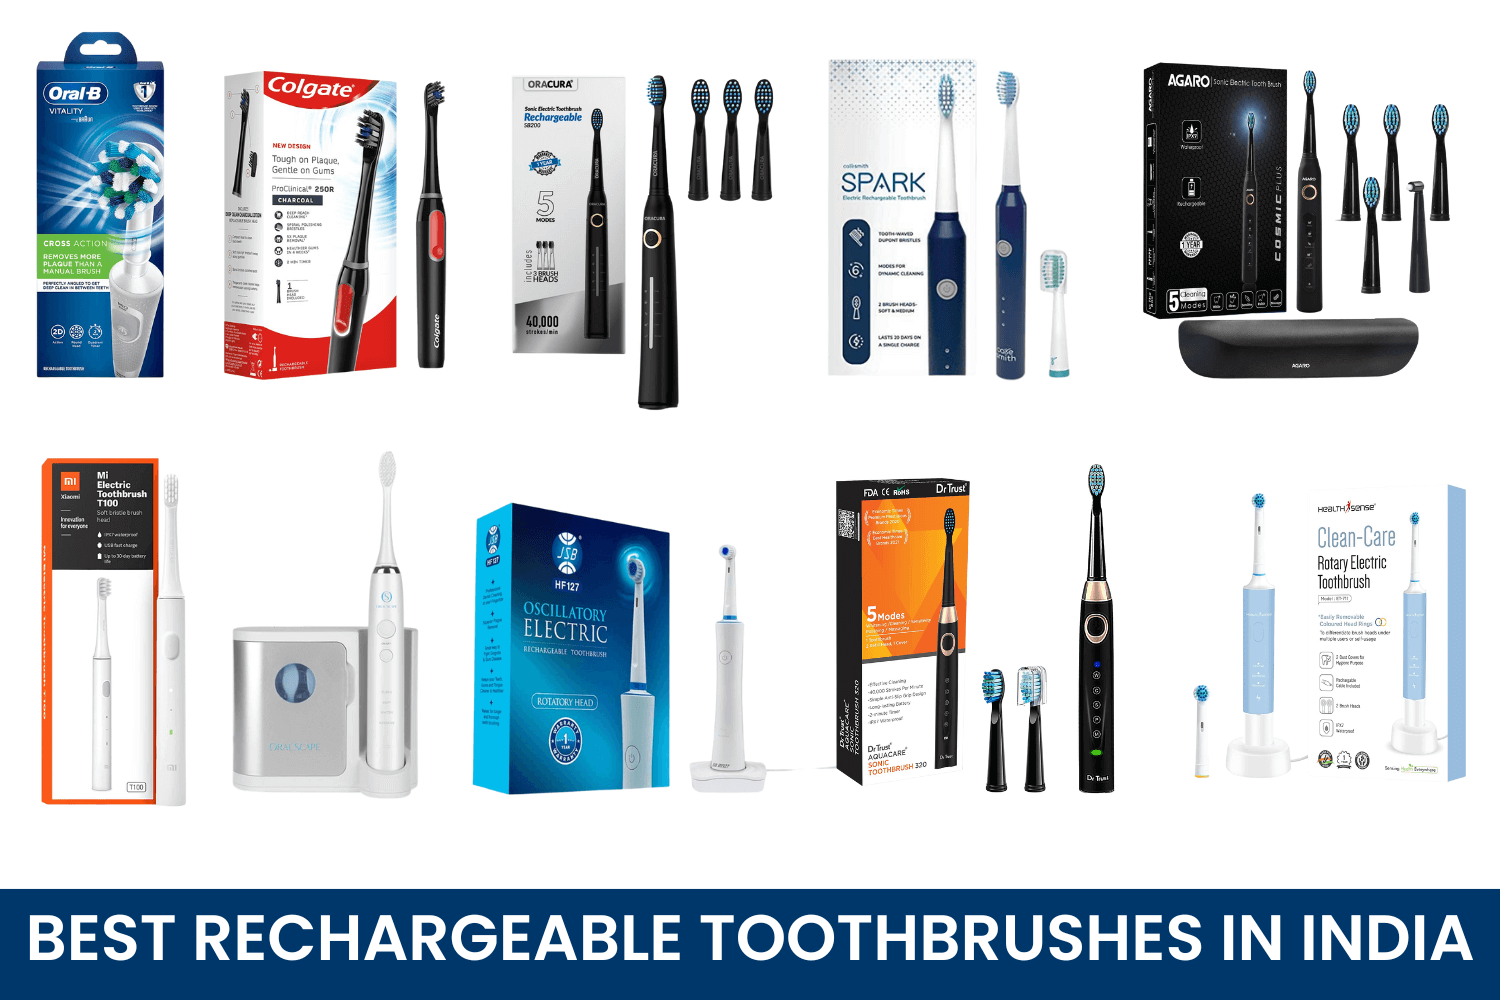 BEST Rechargeable Toothbrushes in India